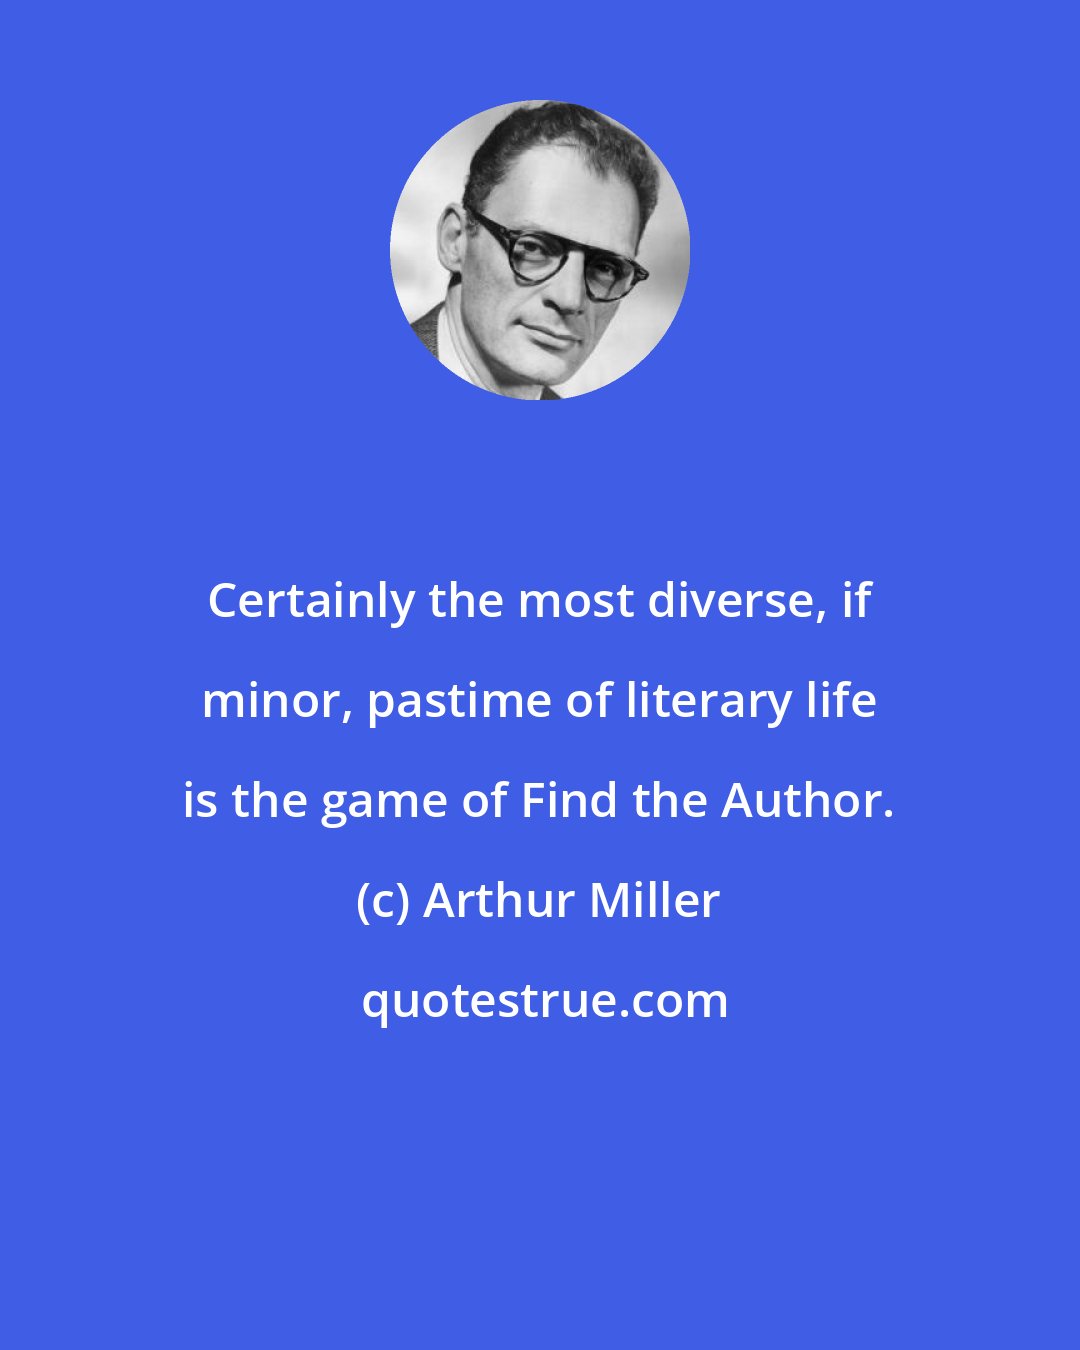 Arthur Miller: Certainly the most diverse, if minor, pastime of literary life is the game of Find the Author.